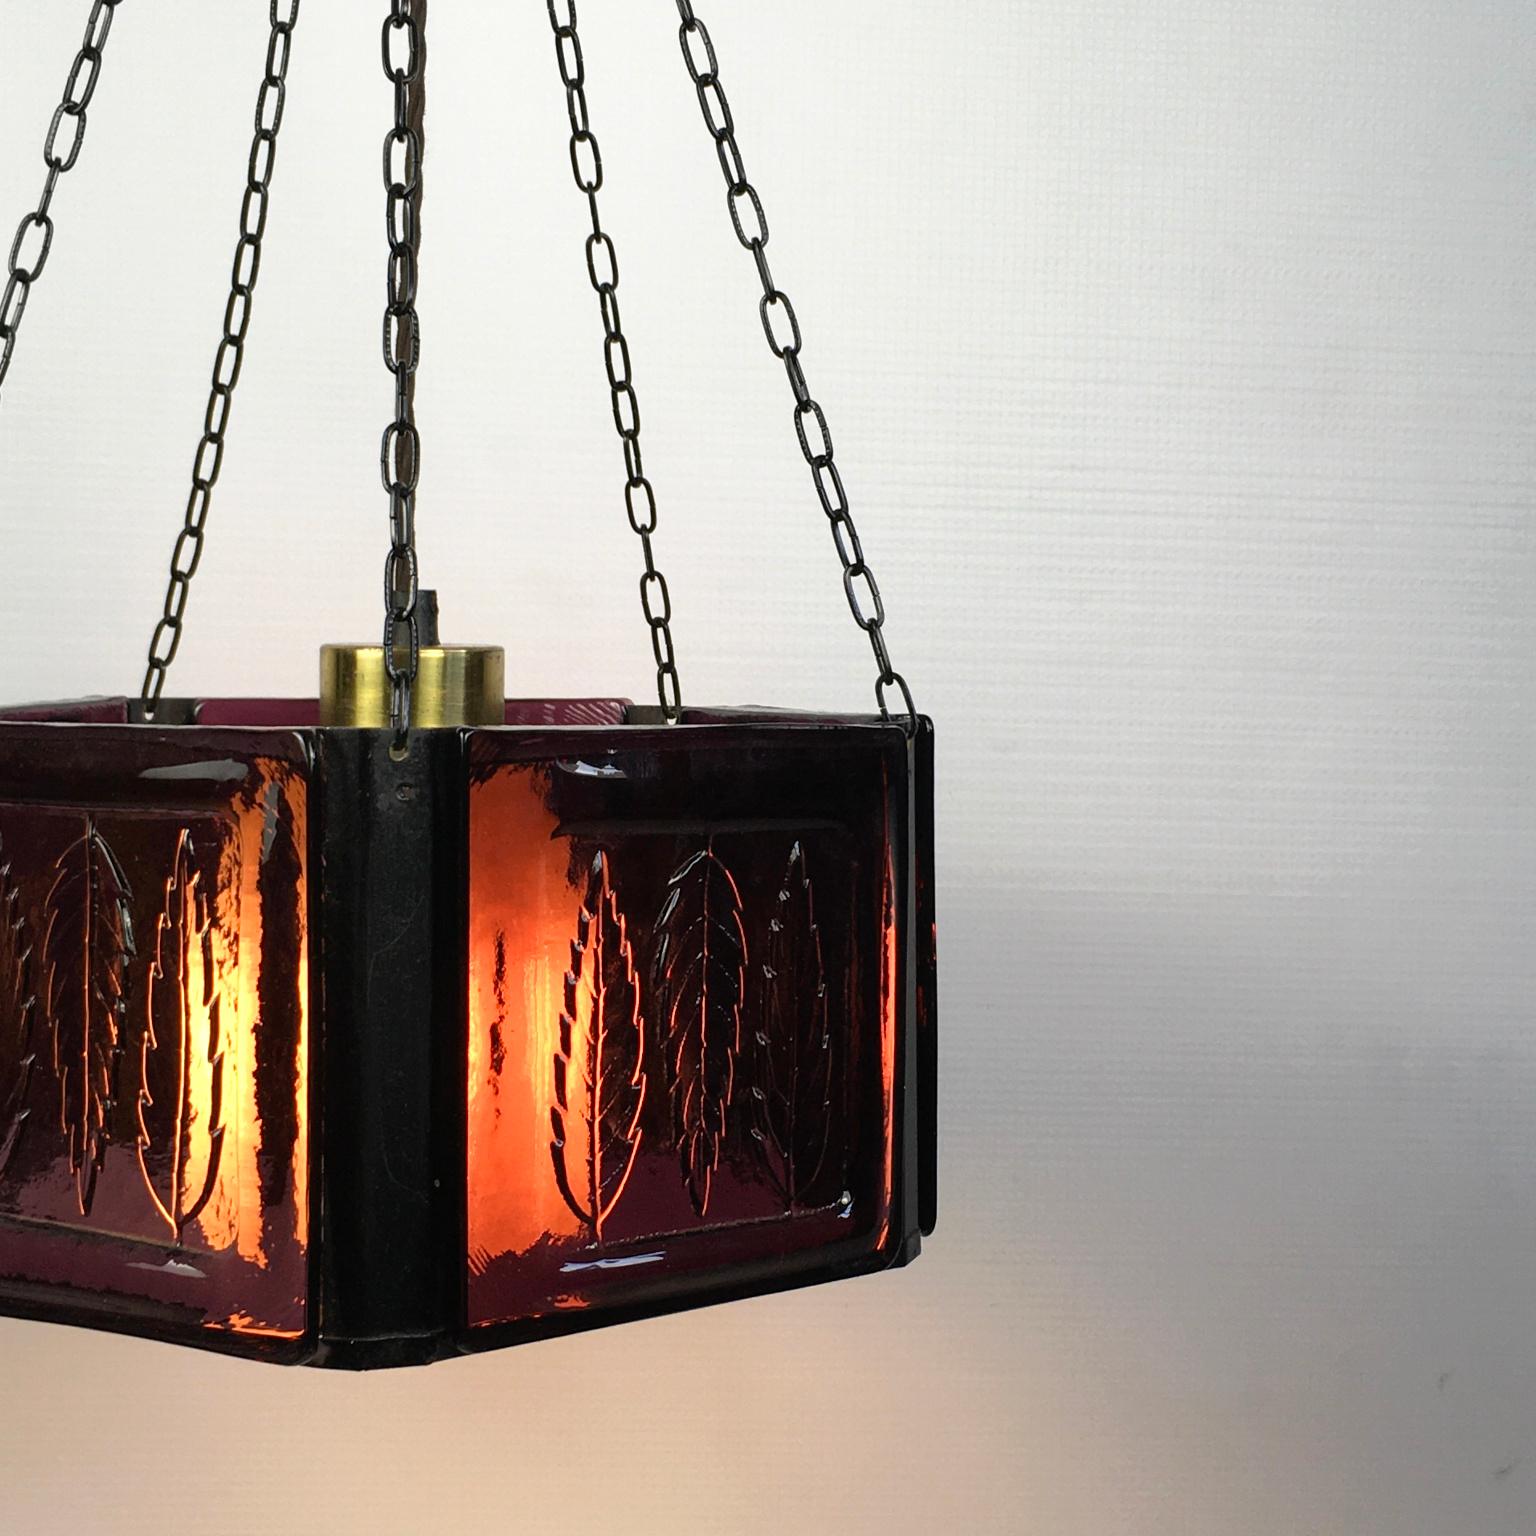 Metal Pendant Lamp by Erik Höglund with Purple Glass for Boda Glasburk, Sweden, 1960s For Sale